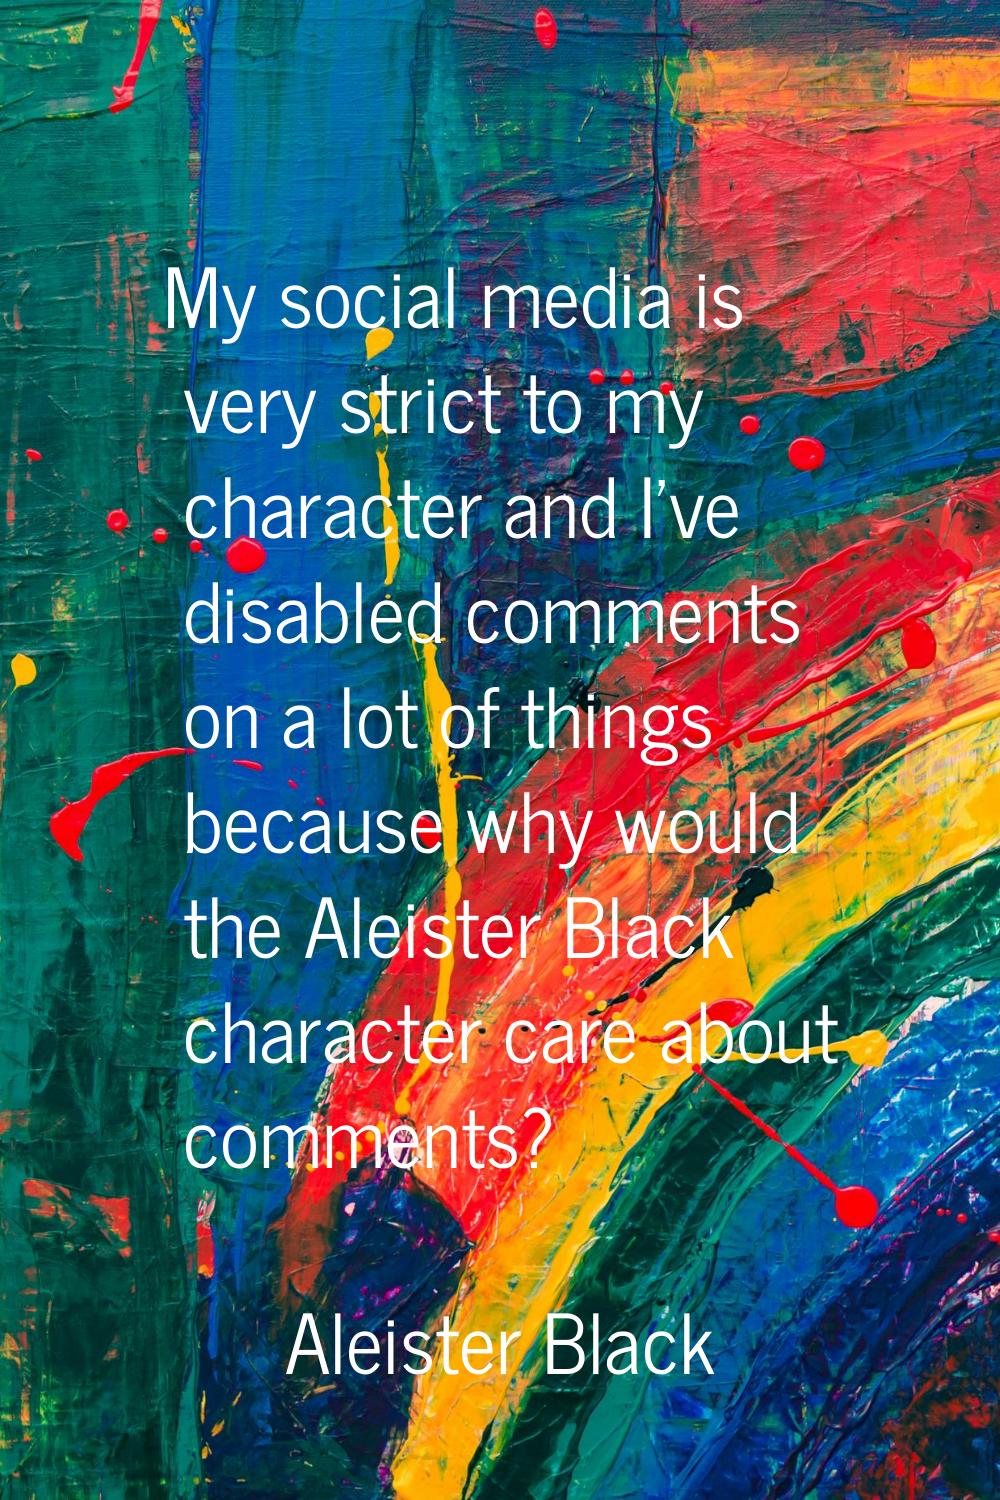 My social media is very strict to my character and I've disabled comments on a lot of things becaus